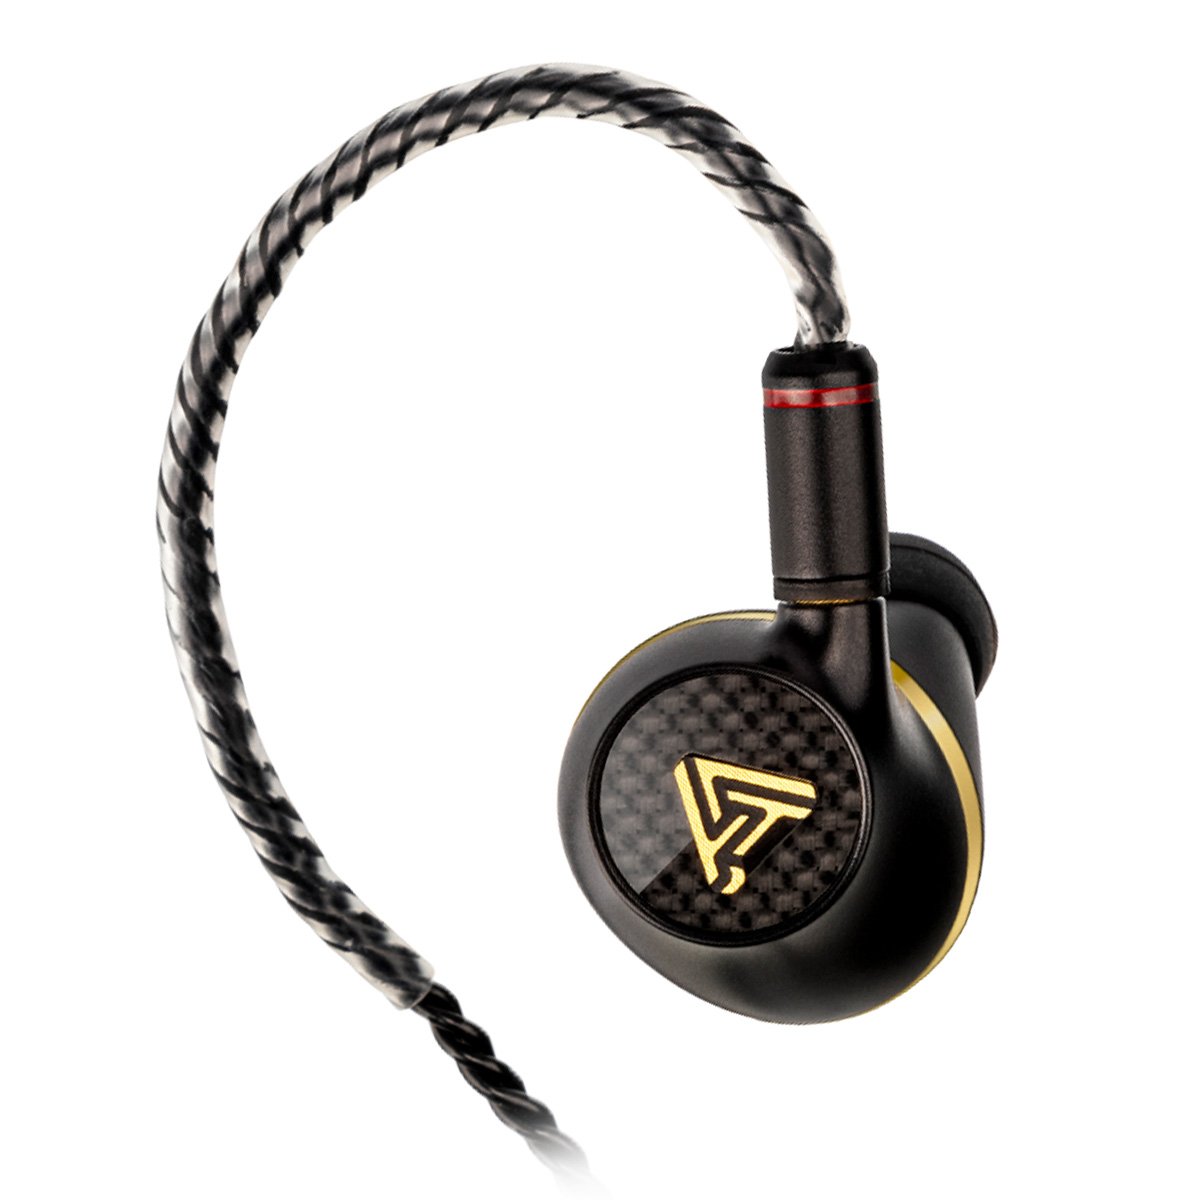 Audeze Euclid planar magnetic closed-back in-ear